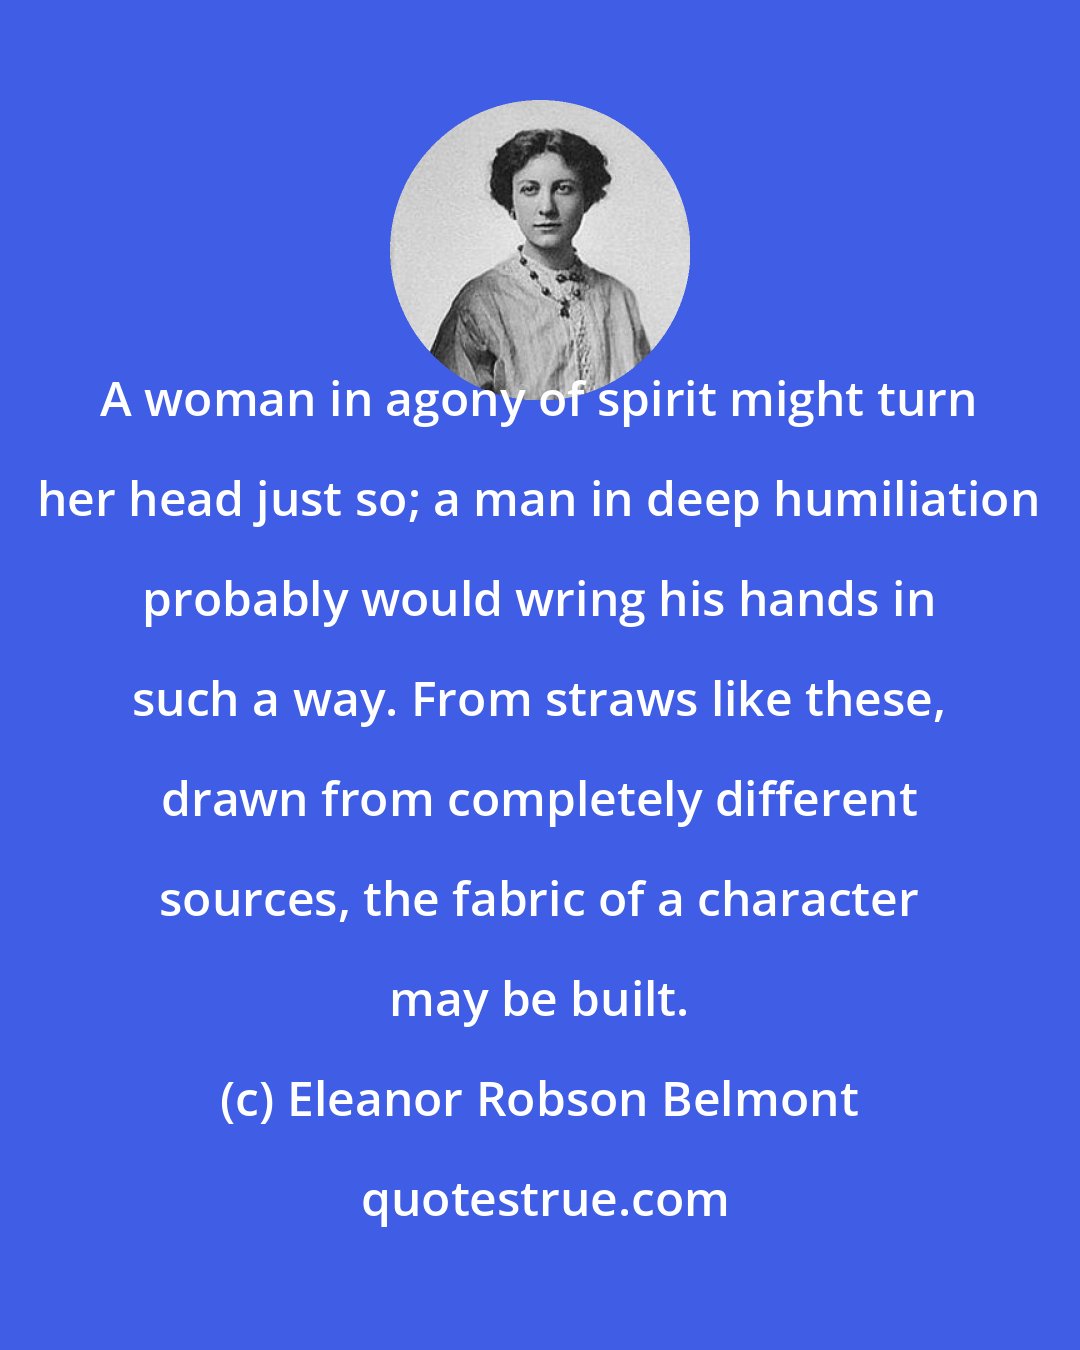 Eleanor Robson Belmont: A woman in agony of spirit might turn her head just so; a man in deep humiliation probably would wring his hands in such a way. From straws like these, drawn from completely different sources, the fabric of a character may be built.